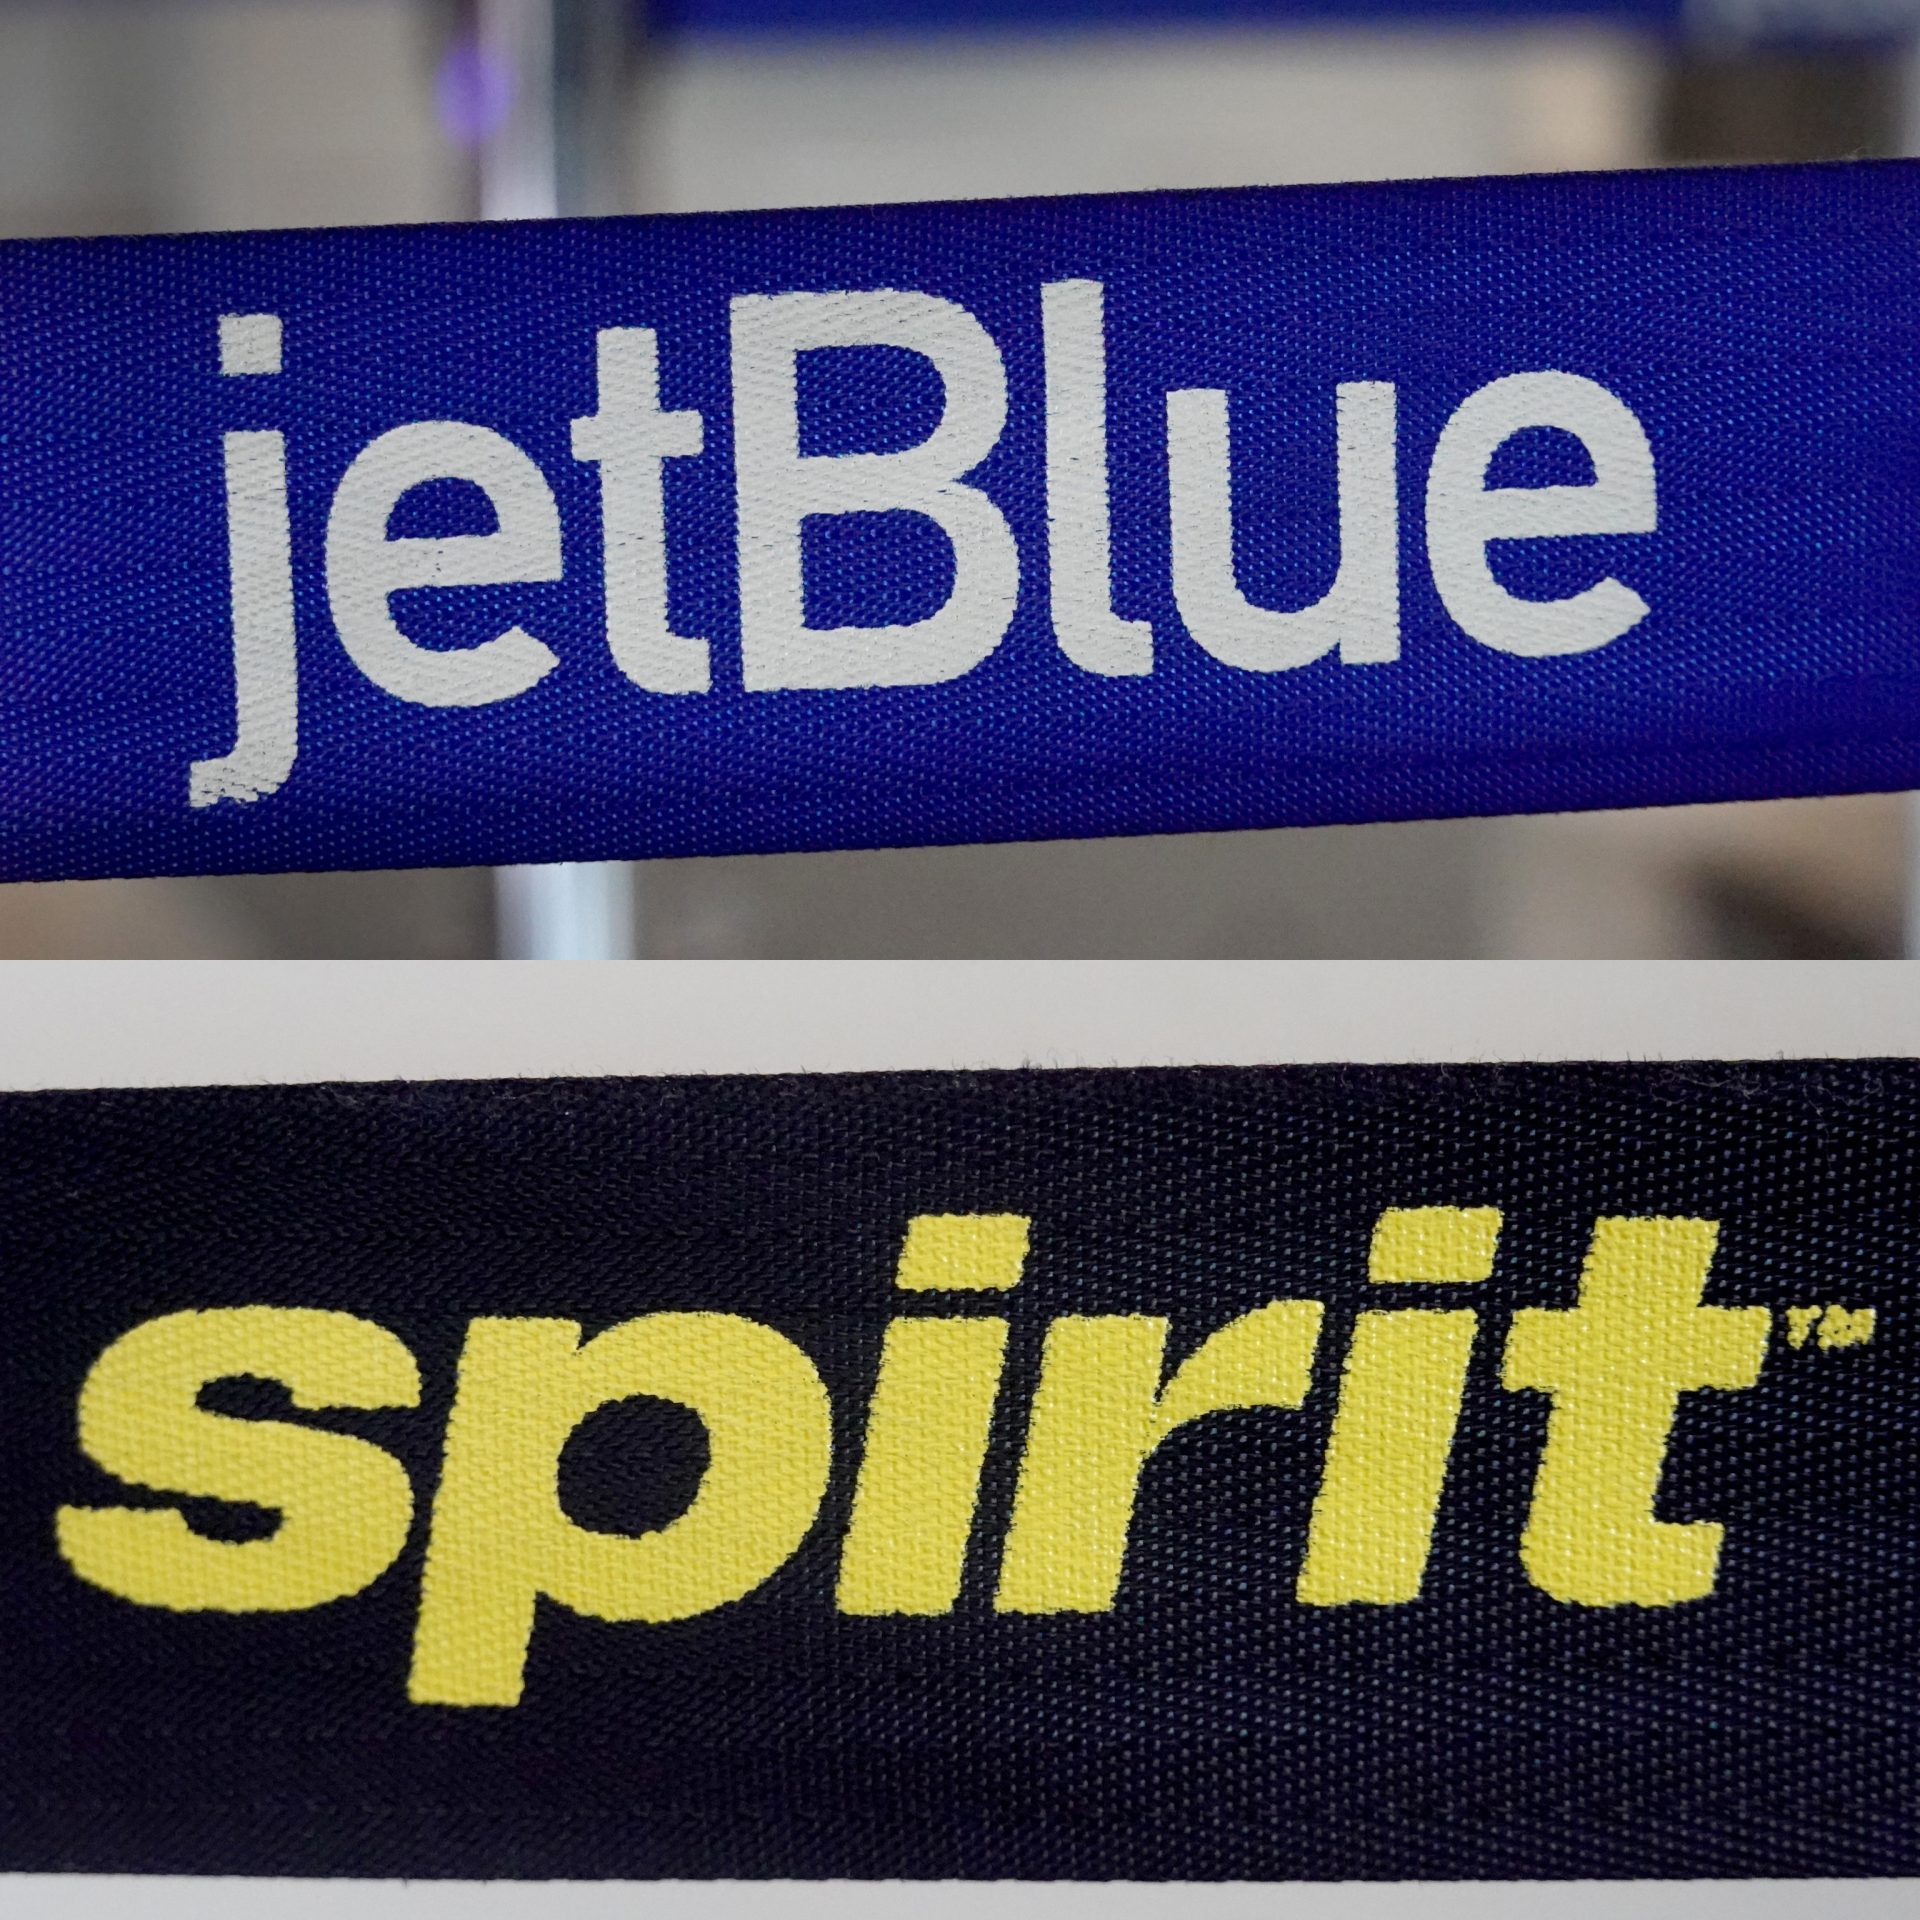 JetBlue Agrees To Purchase Spirit Airlines For $3.8 Billion After Months Of Negotiations (Update)